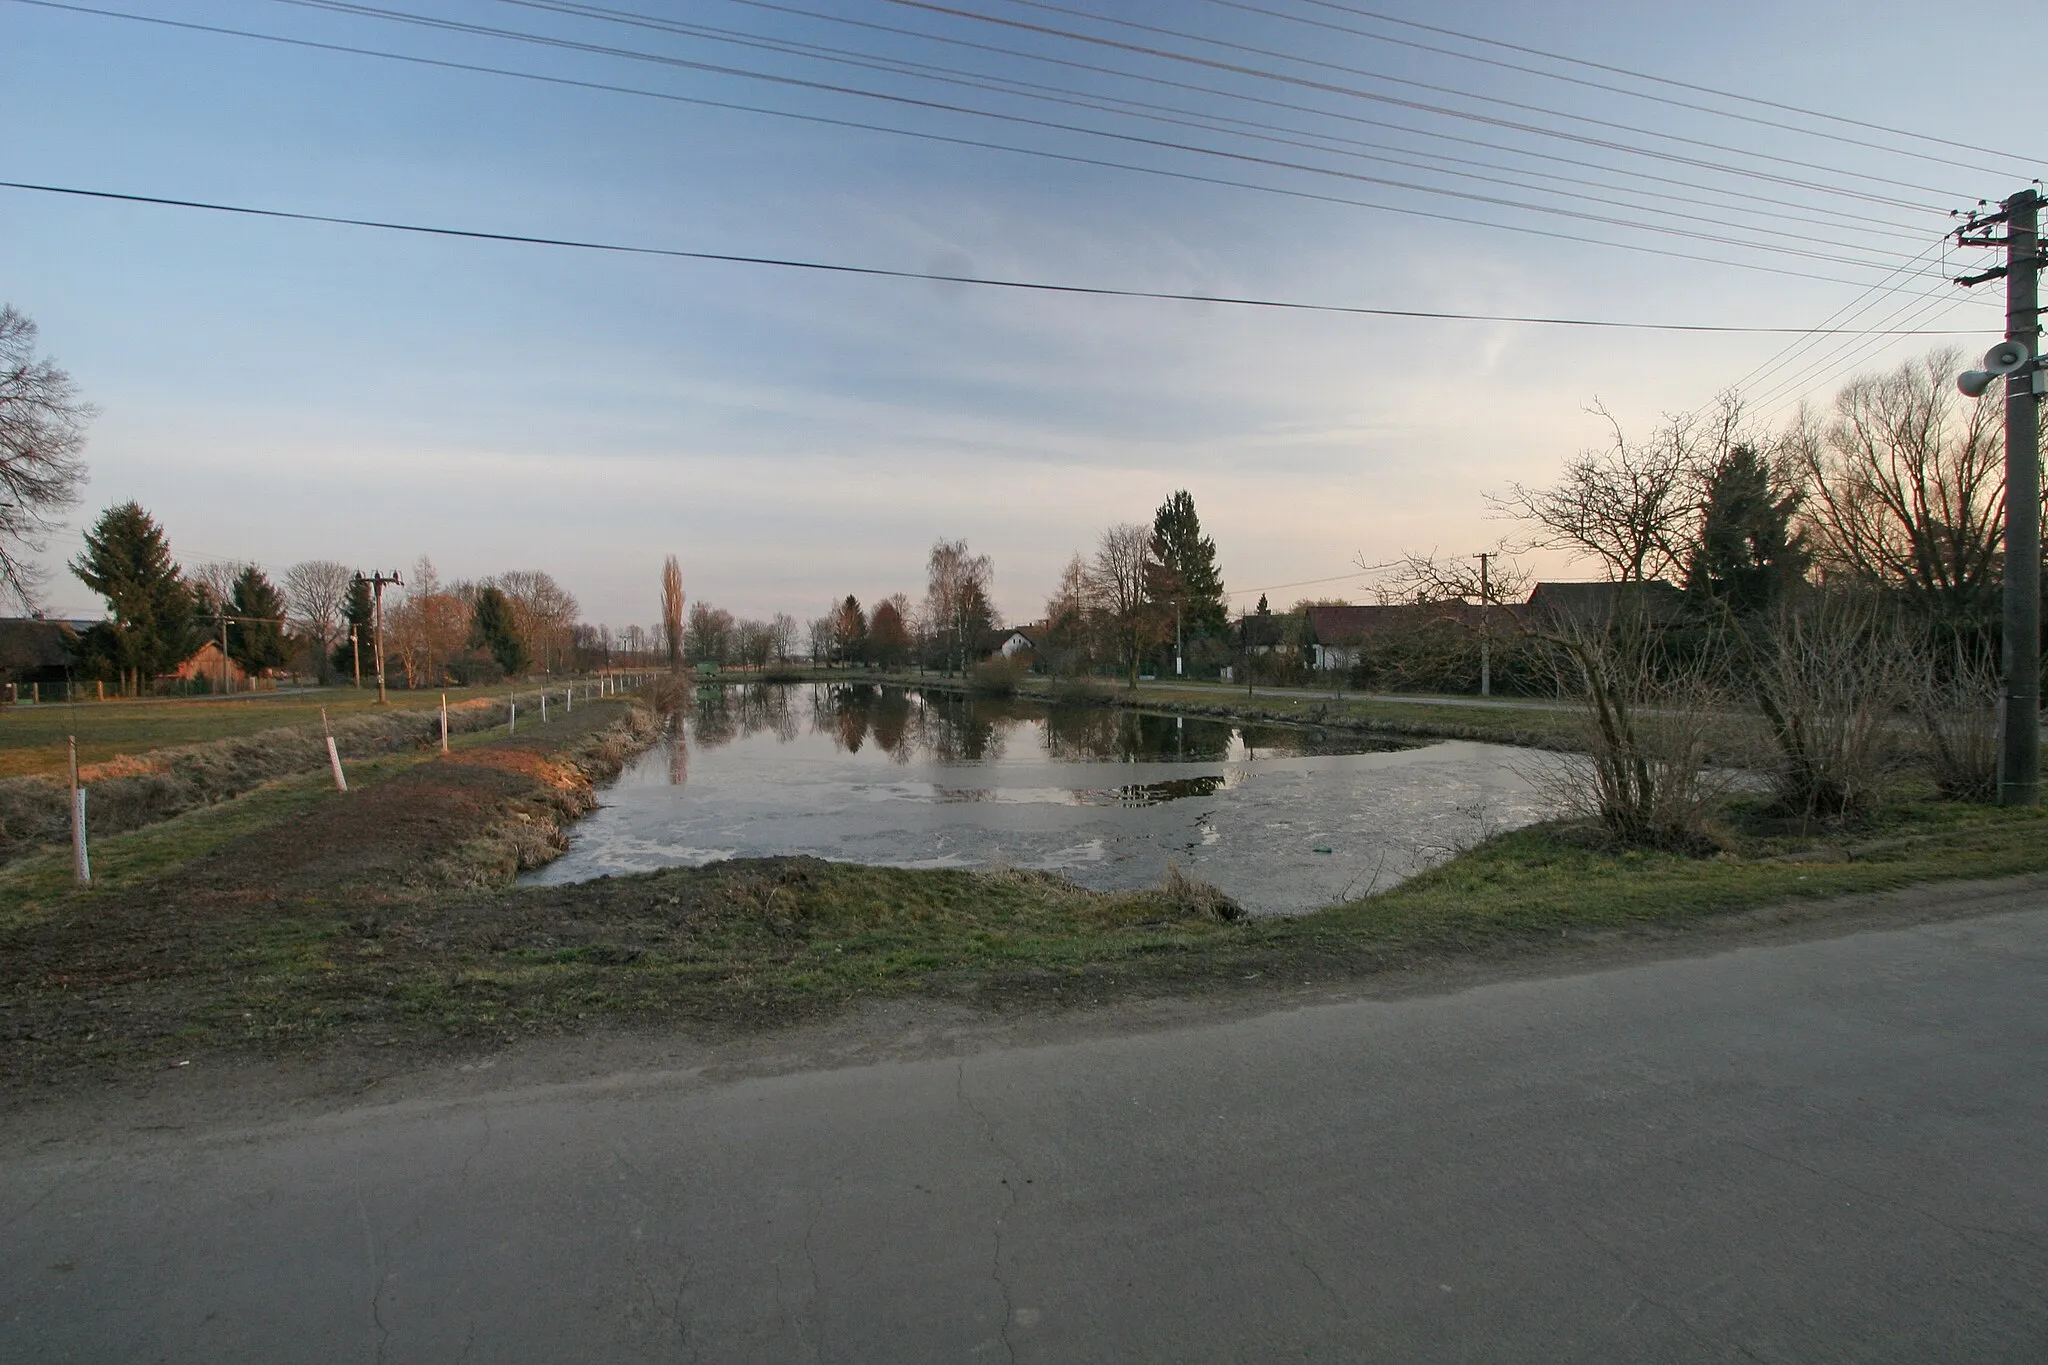 Photo showing: Nevratice návesní rybník
Camera location 50° 20′ 47.37″ N, 15° 29′ 30.71″ E View this and other nearby images on: OpenStreetMap 50.346491;   15.491865

This file was created as a part of the photographic program of Wikimedia Czech Republic. Project: Foto českých obcí The program supports Wikimedia Commons photographers in the Czech Republic.